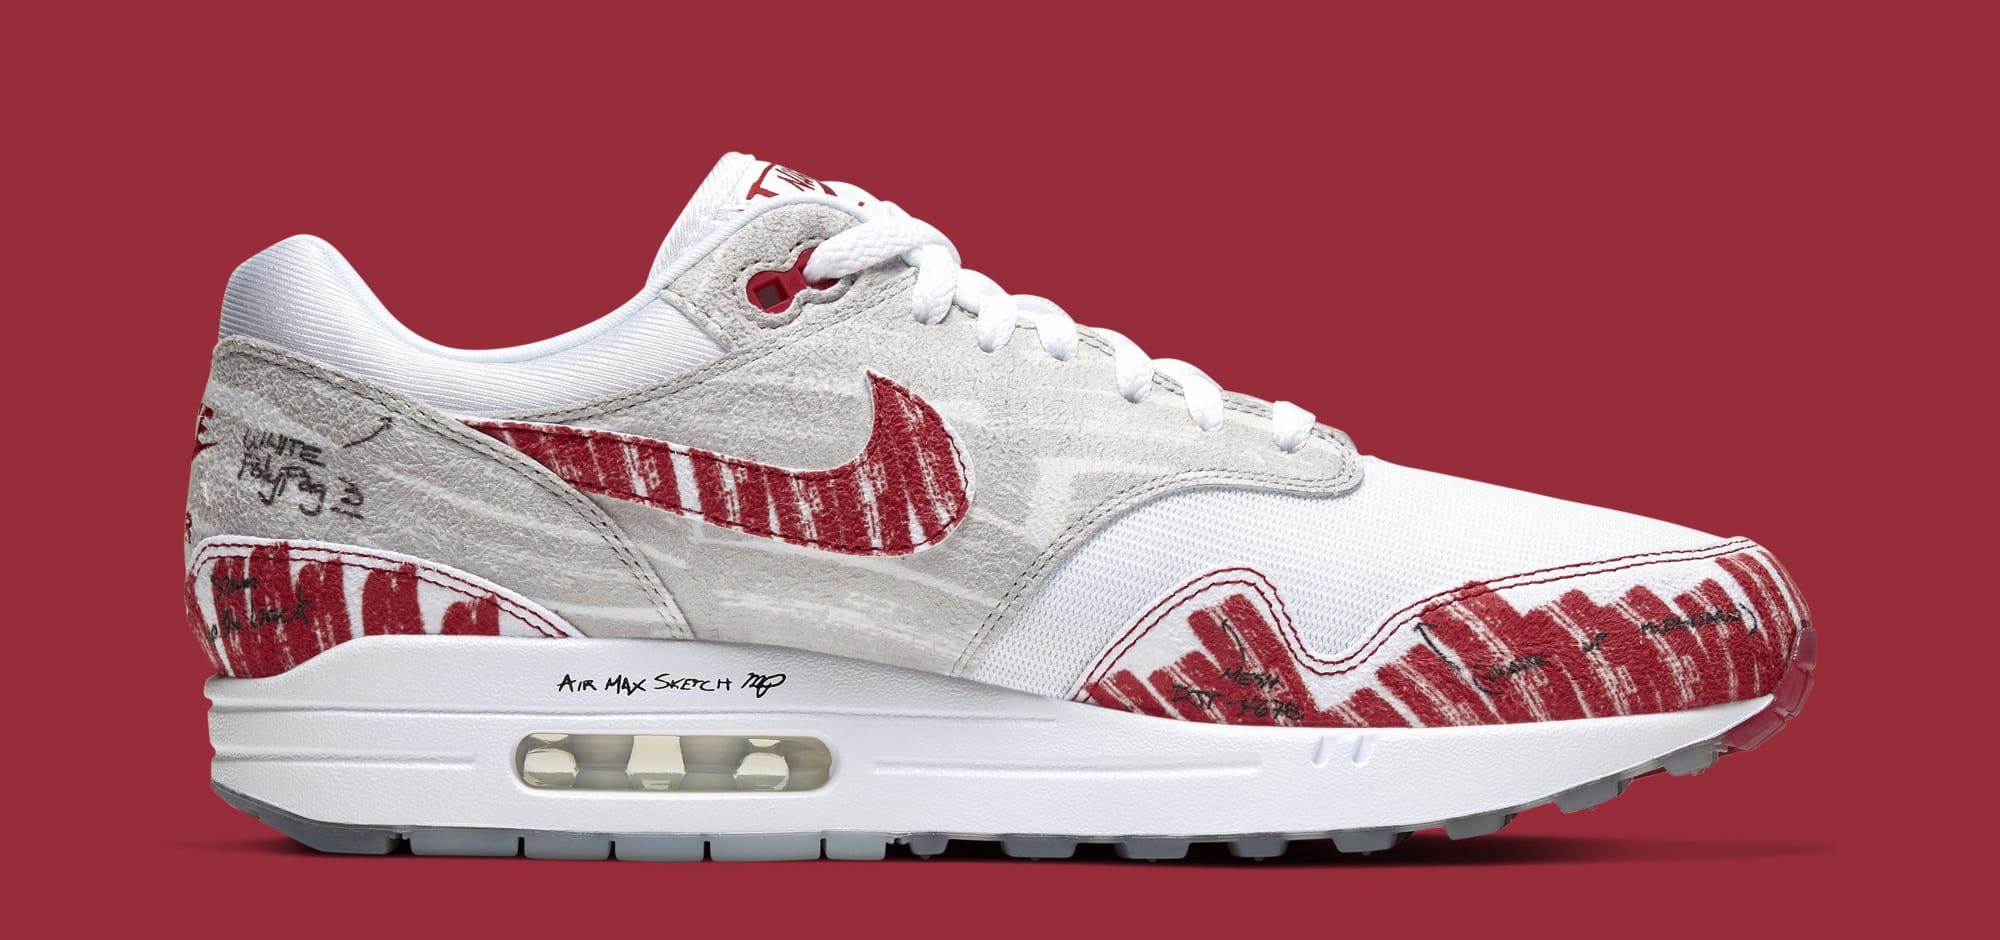 Best Look Yet at the Air Max 1s Inspired by Tinker Hatfield's 